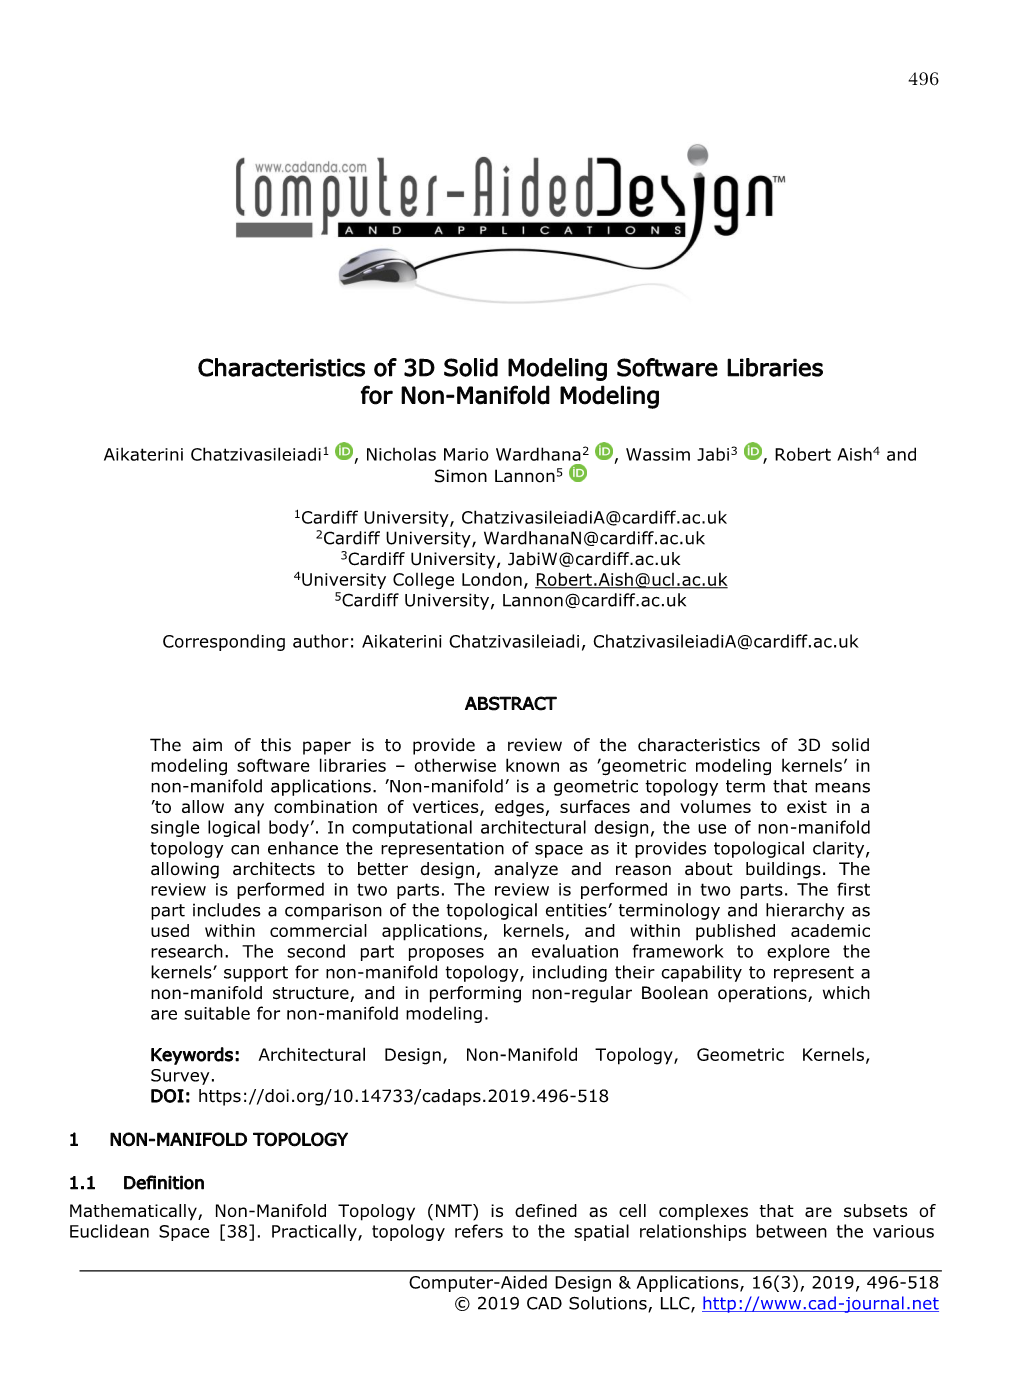 Characteristics of 3D Solid Modeling Software Libraries for Non-Manifold Modeling